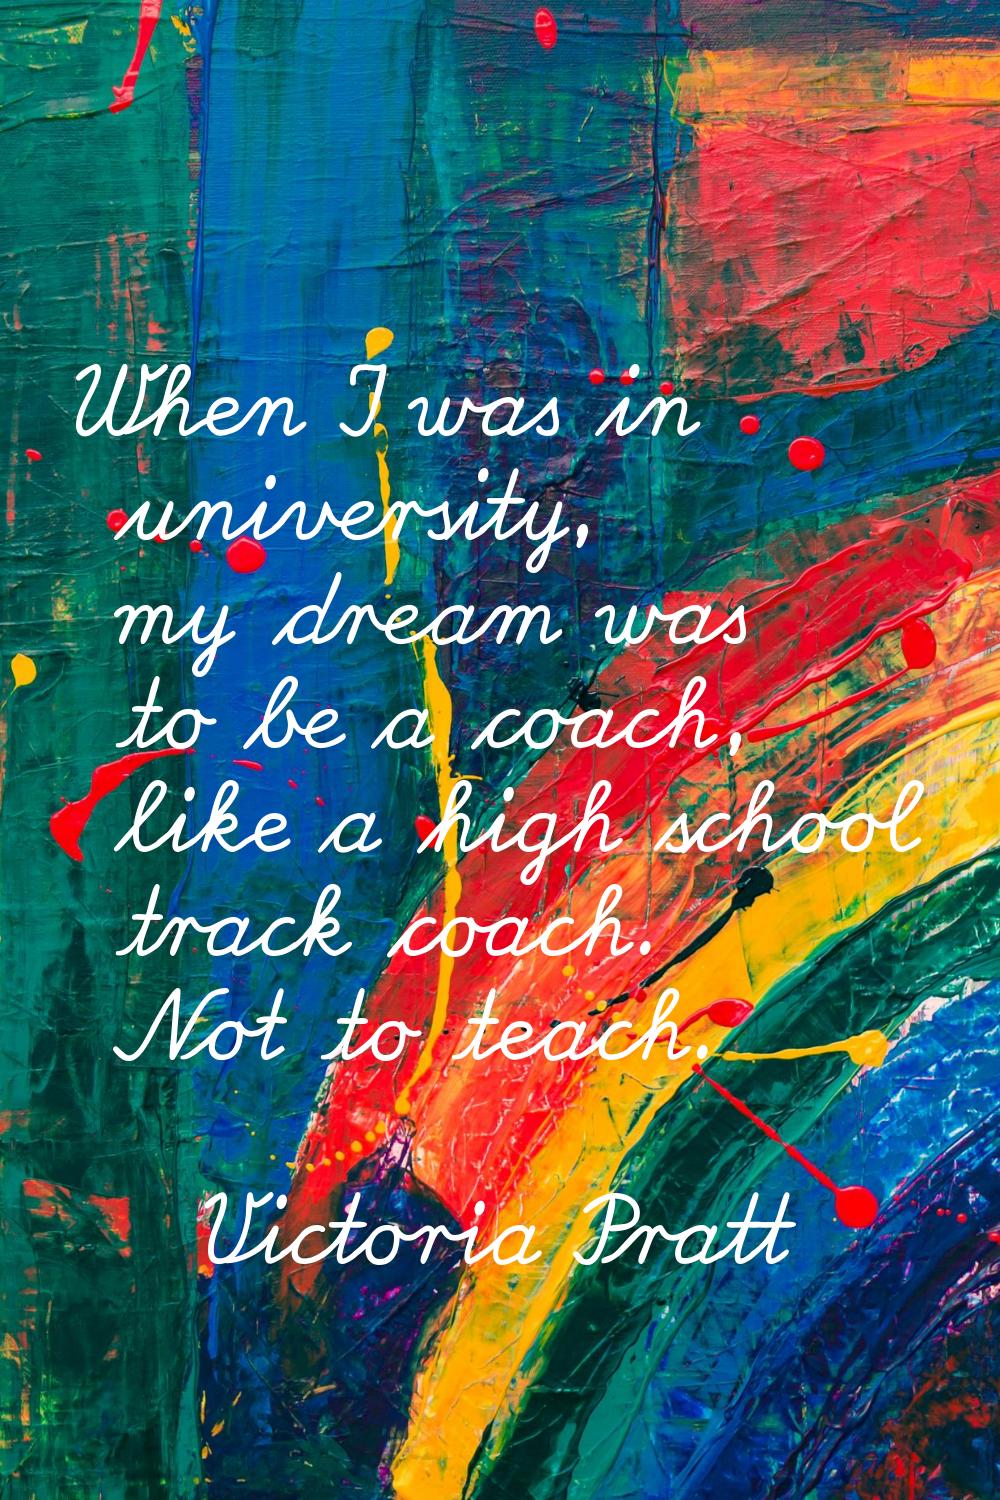 When I was in university, my dream was to be a coach, like a high school track coach. Not to teach.